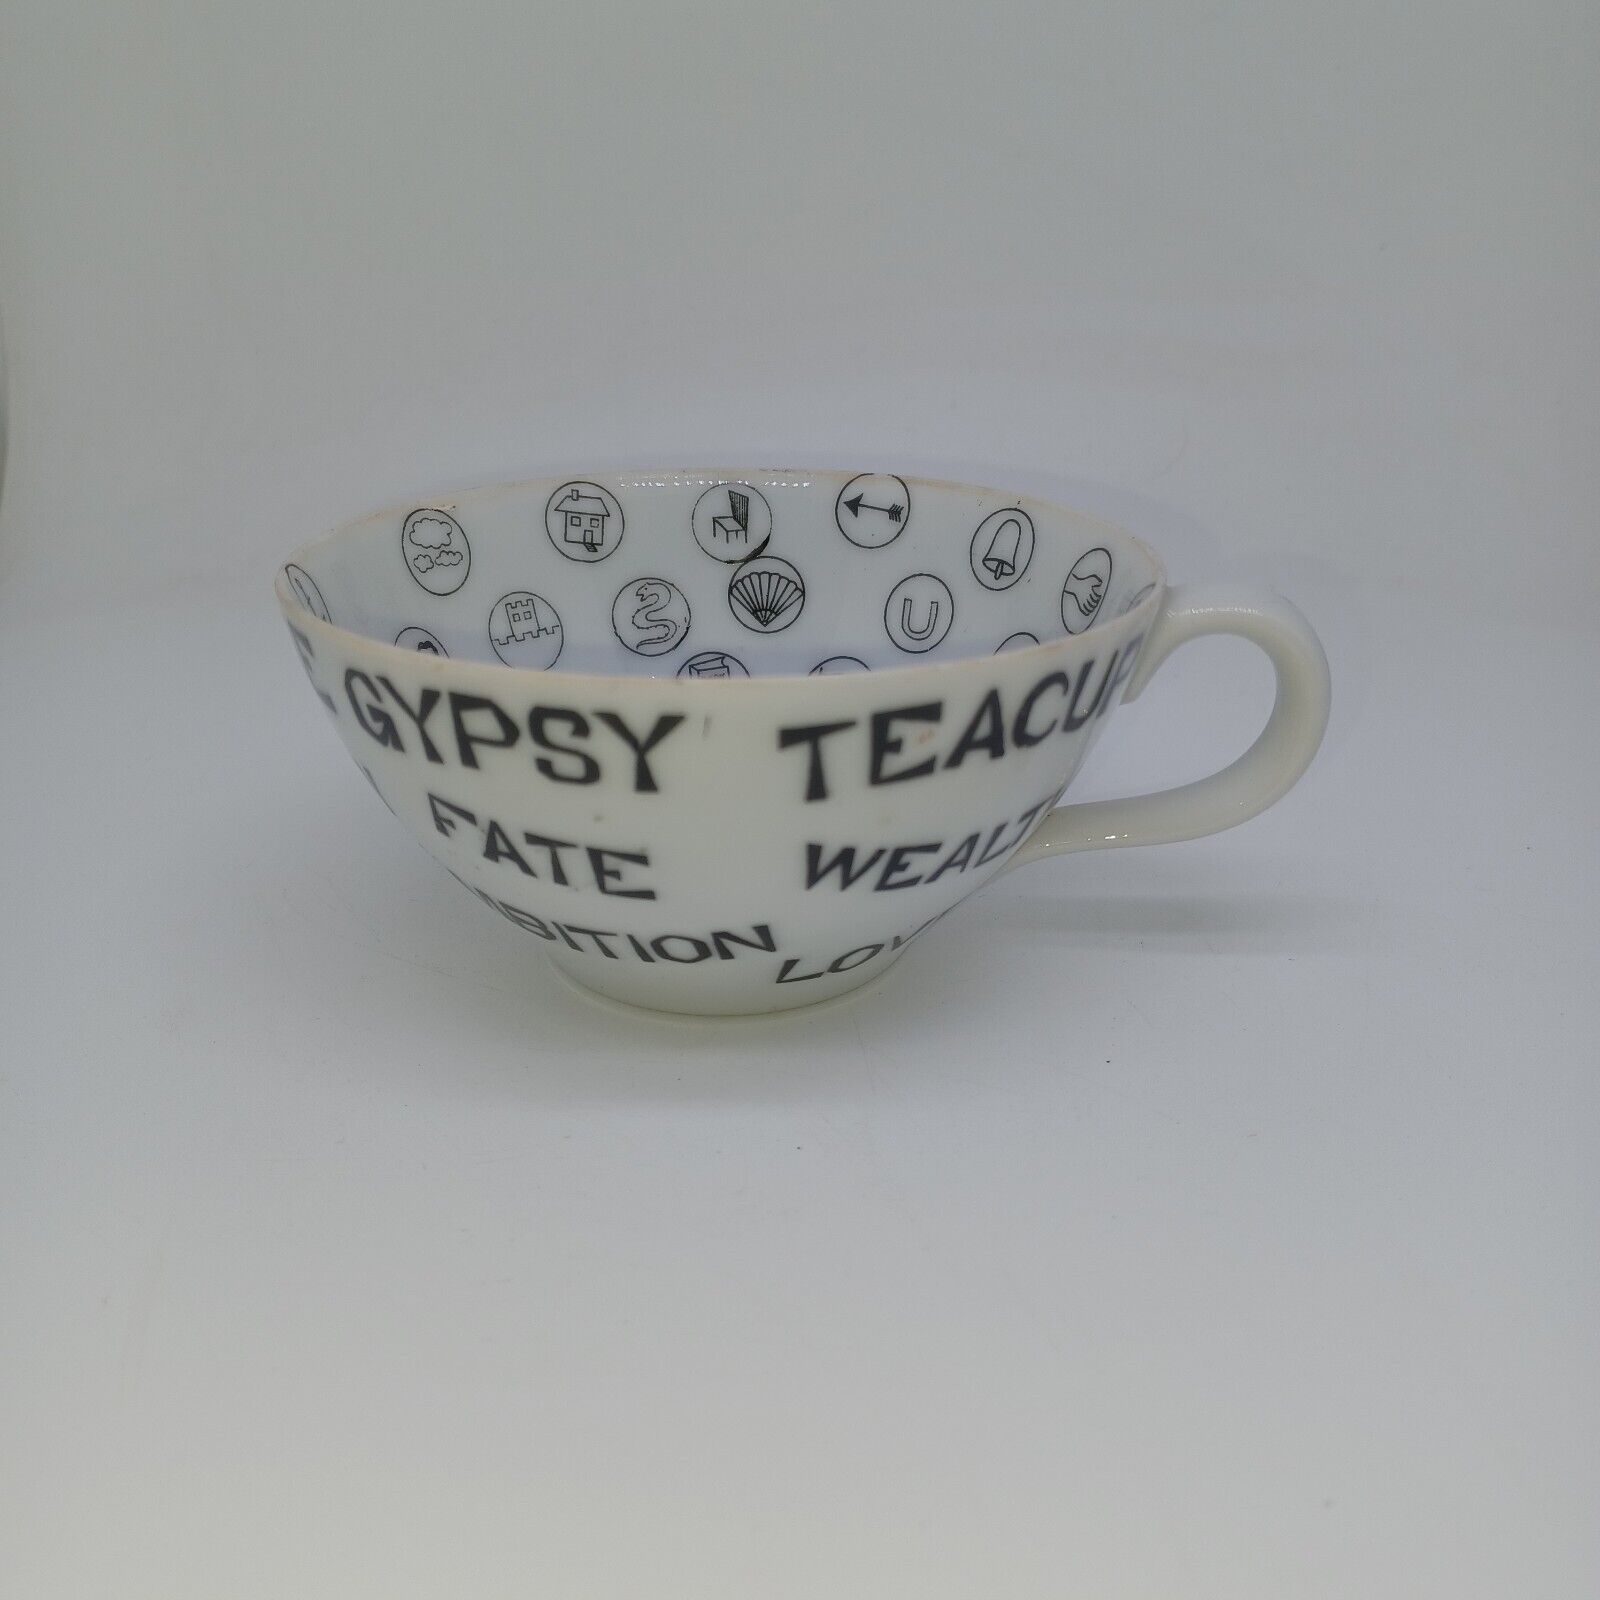 RARE 1959 THE GYPSY TEACUP By ORIGINALITY PLUS Tea-Leaf-Reading Cup 